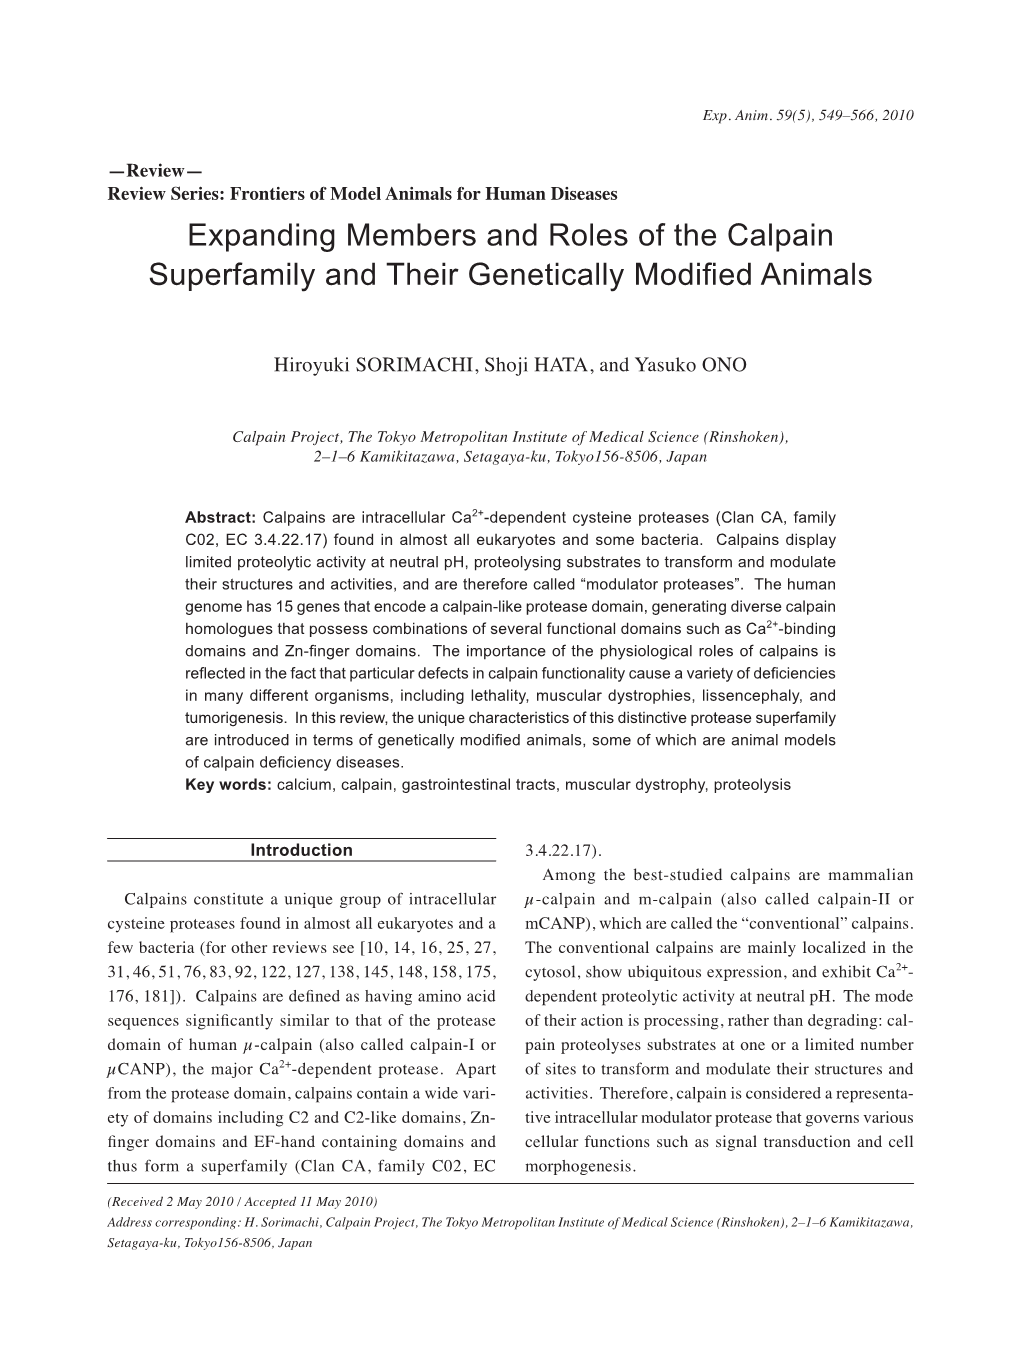 Expanding Members and Roles of the Calpain Superfamily and Their Genetically Modified Animals